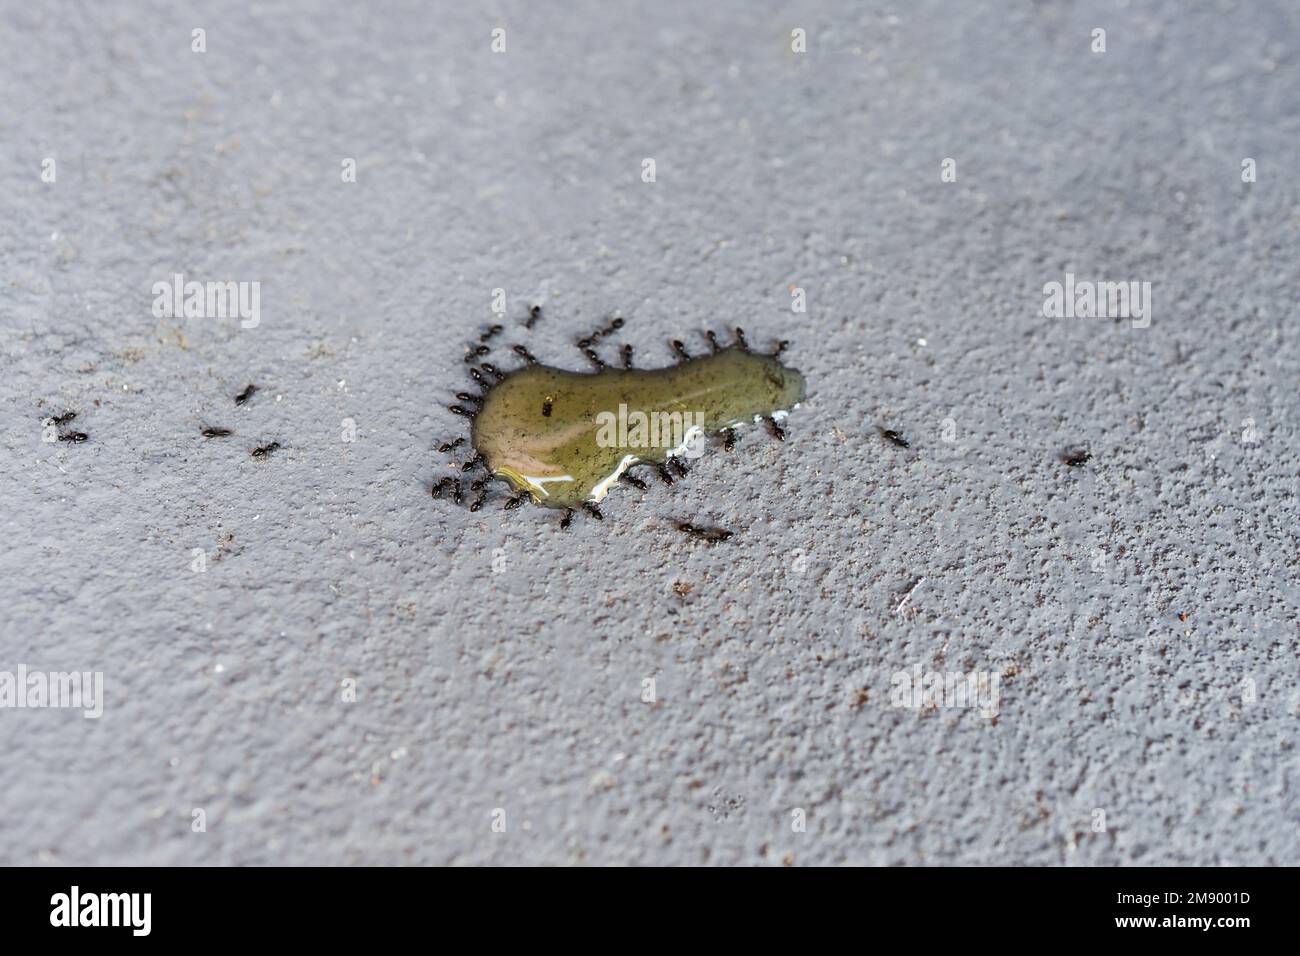 ants collecting around a drop of poison on outdoor concrete, concept of pest control Stock Photo